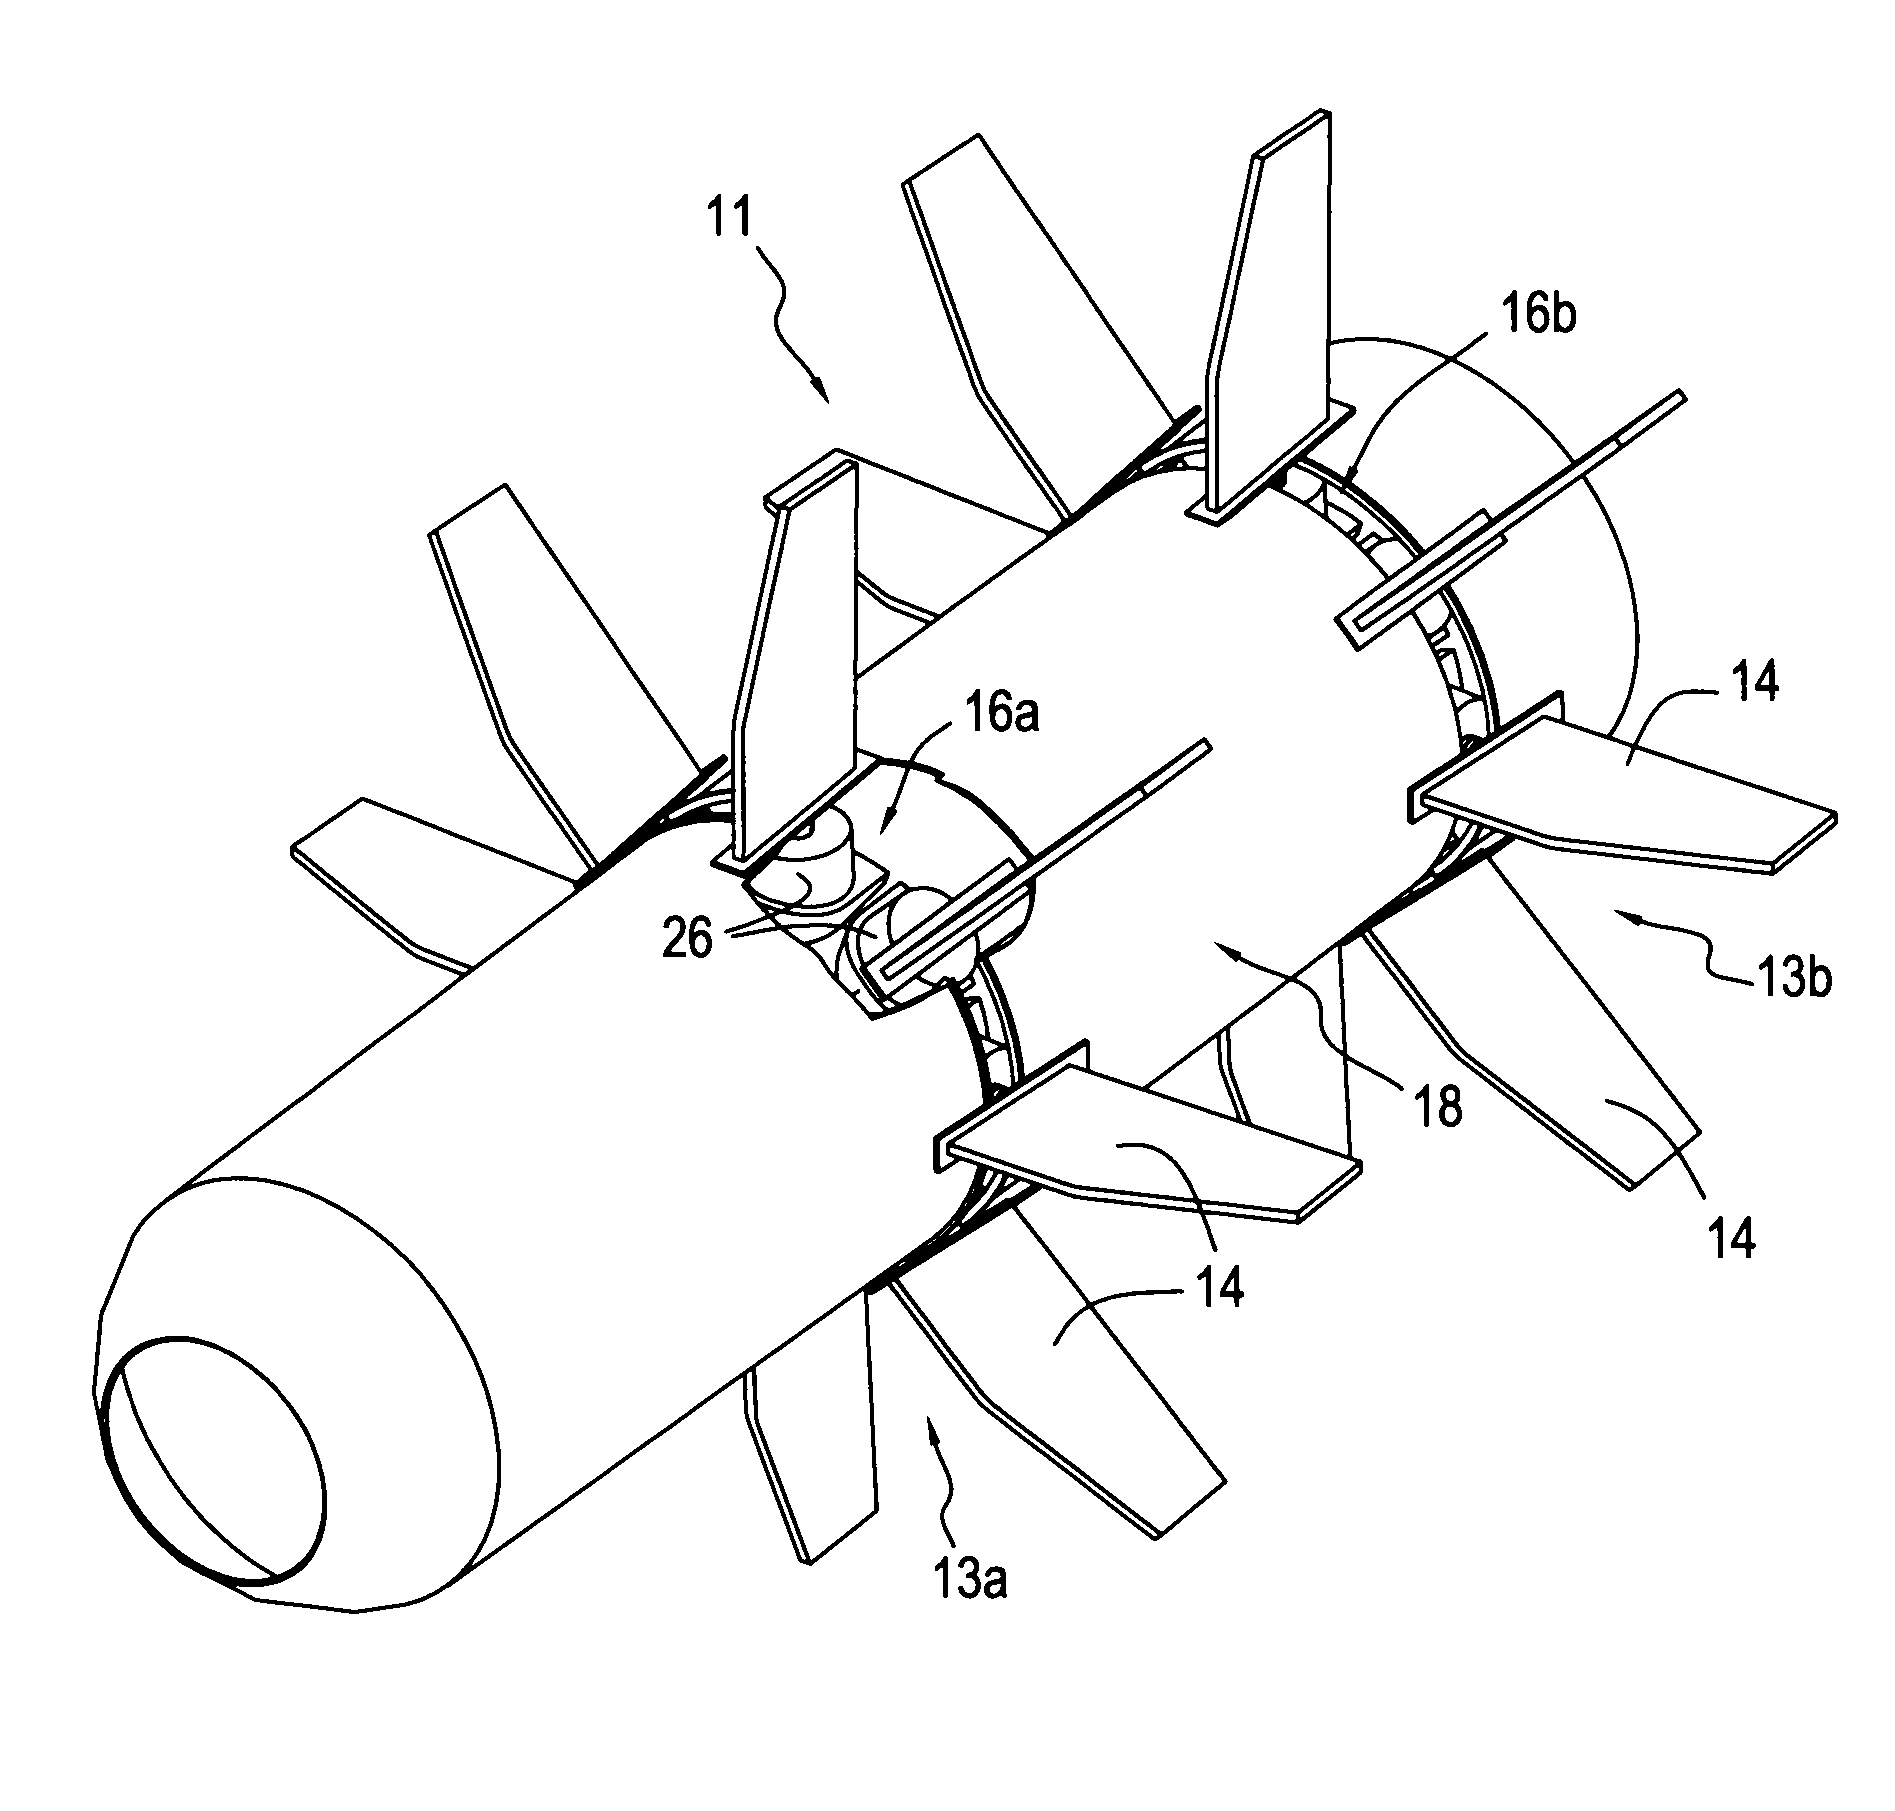 Turboprop having a propeller made up of variable-pitch blades